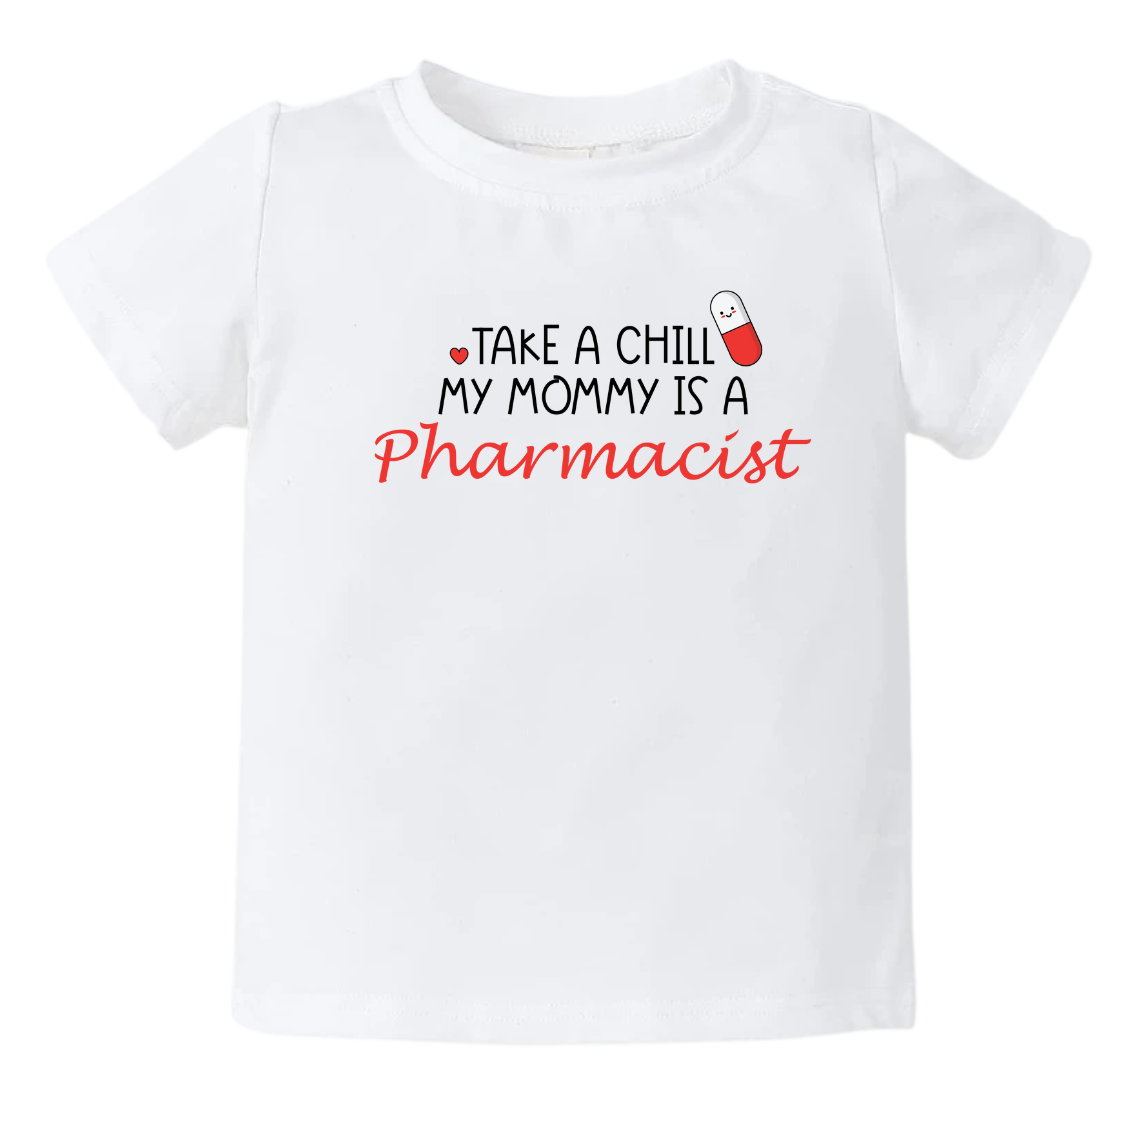 Baby Onesie® Take A Chill Pill Pharmacist Mommy Cute Infant Clothing for Baby Shower Gift